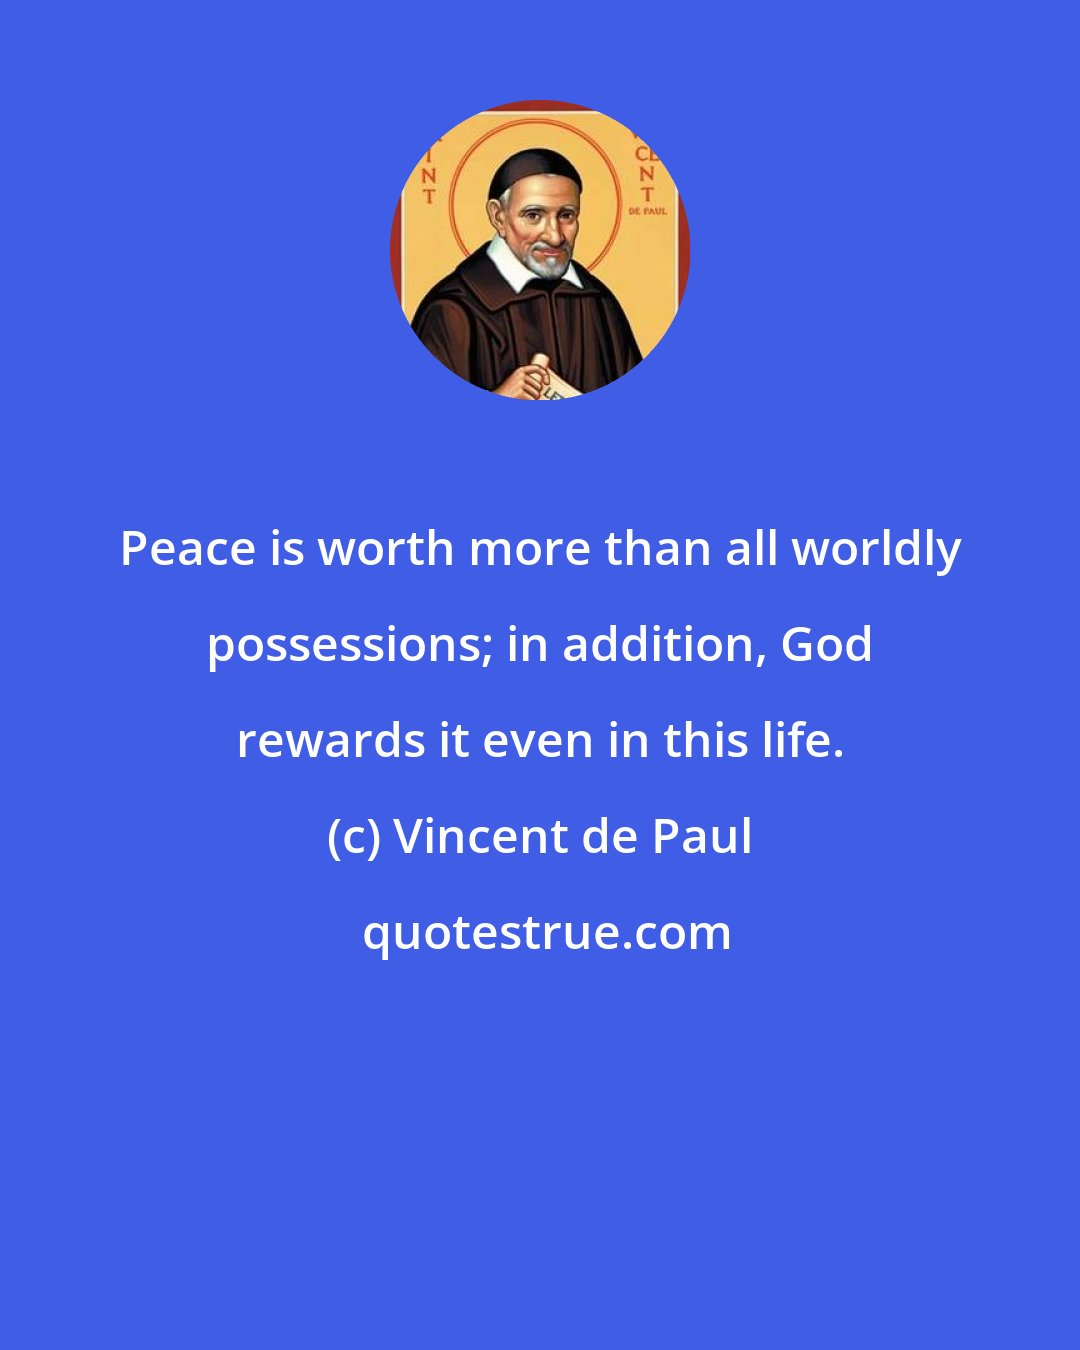 Vincent de Paul: Peace is worth more than all worldly possessions; in addition, God rewards it even in this life.